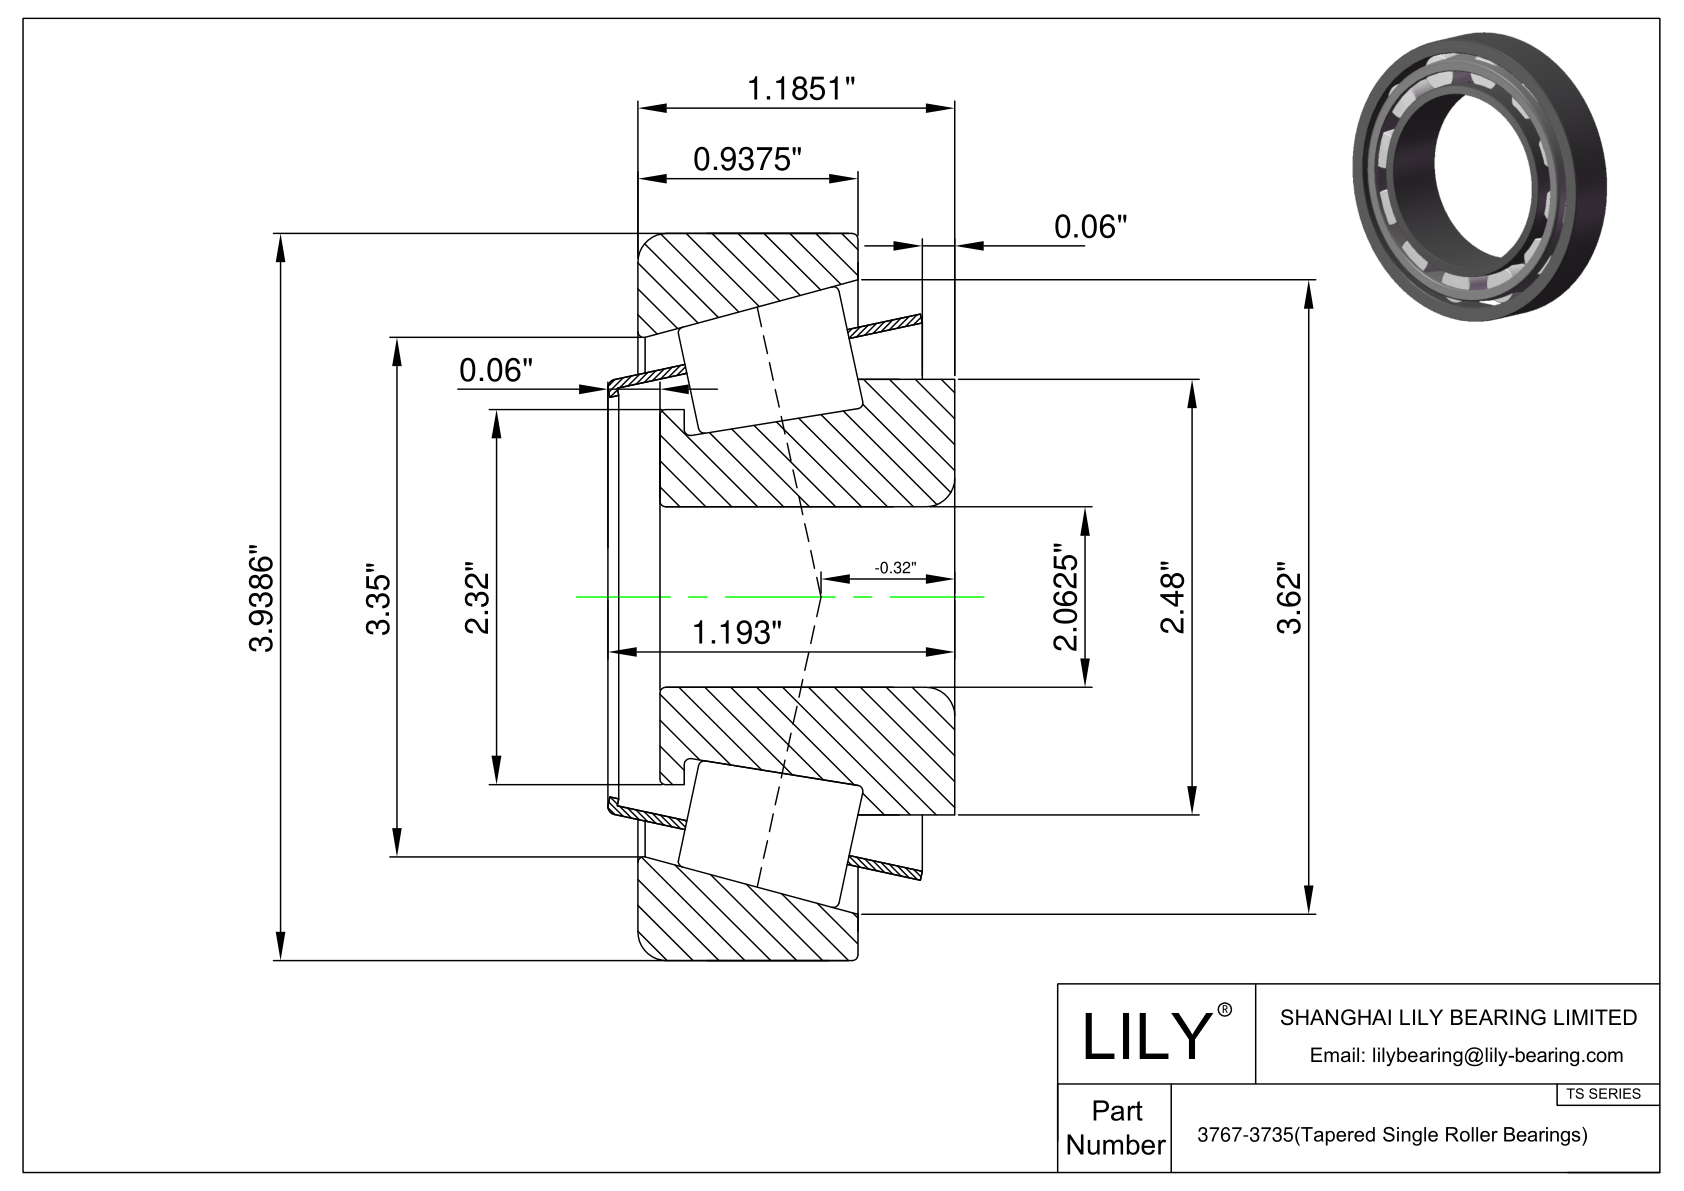 3767-3735 TS (Tapered Single Roller Bearings) (Imperial) cad drawing